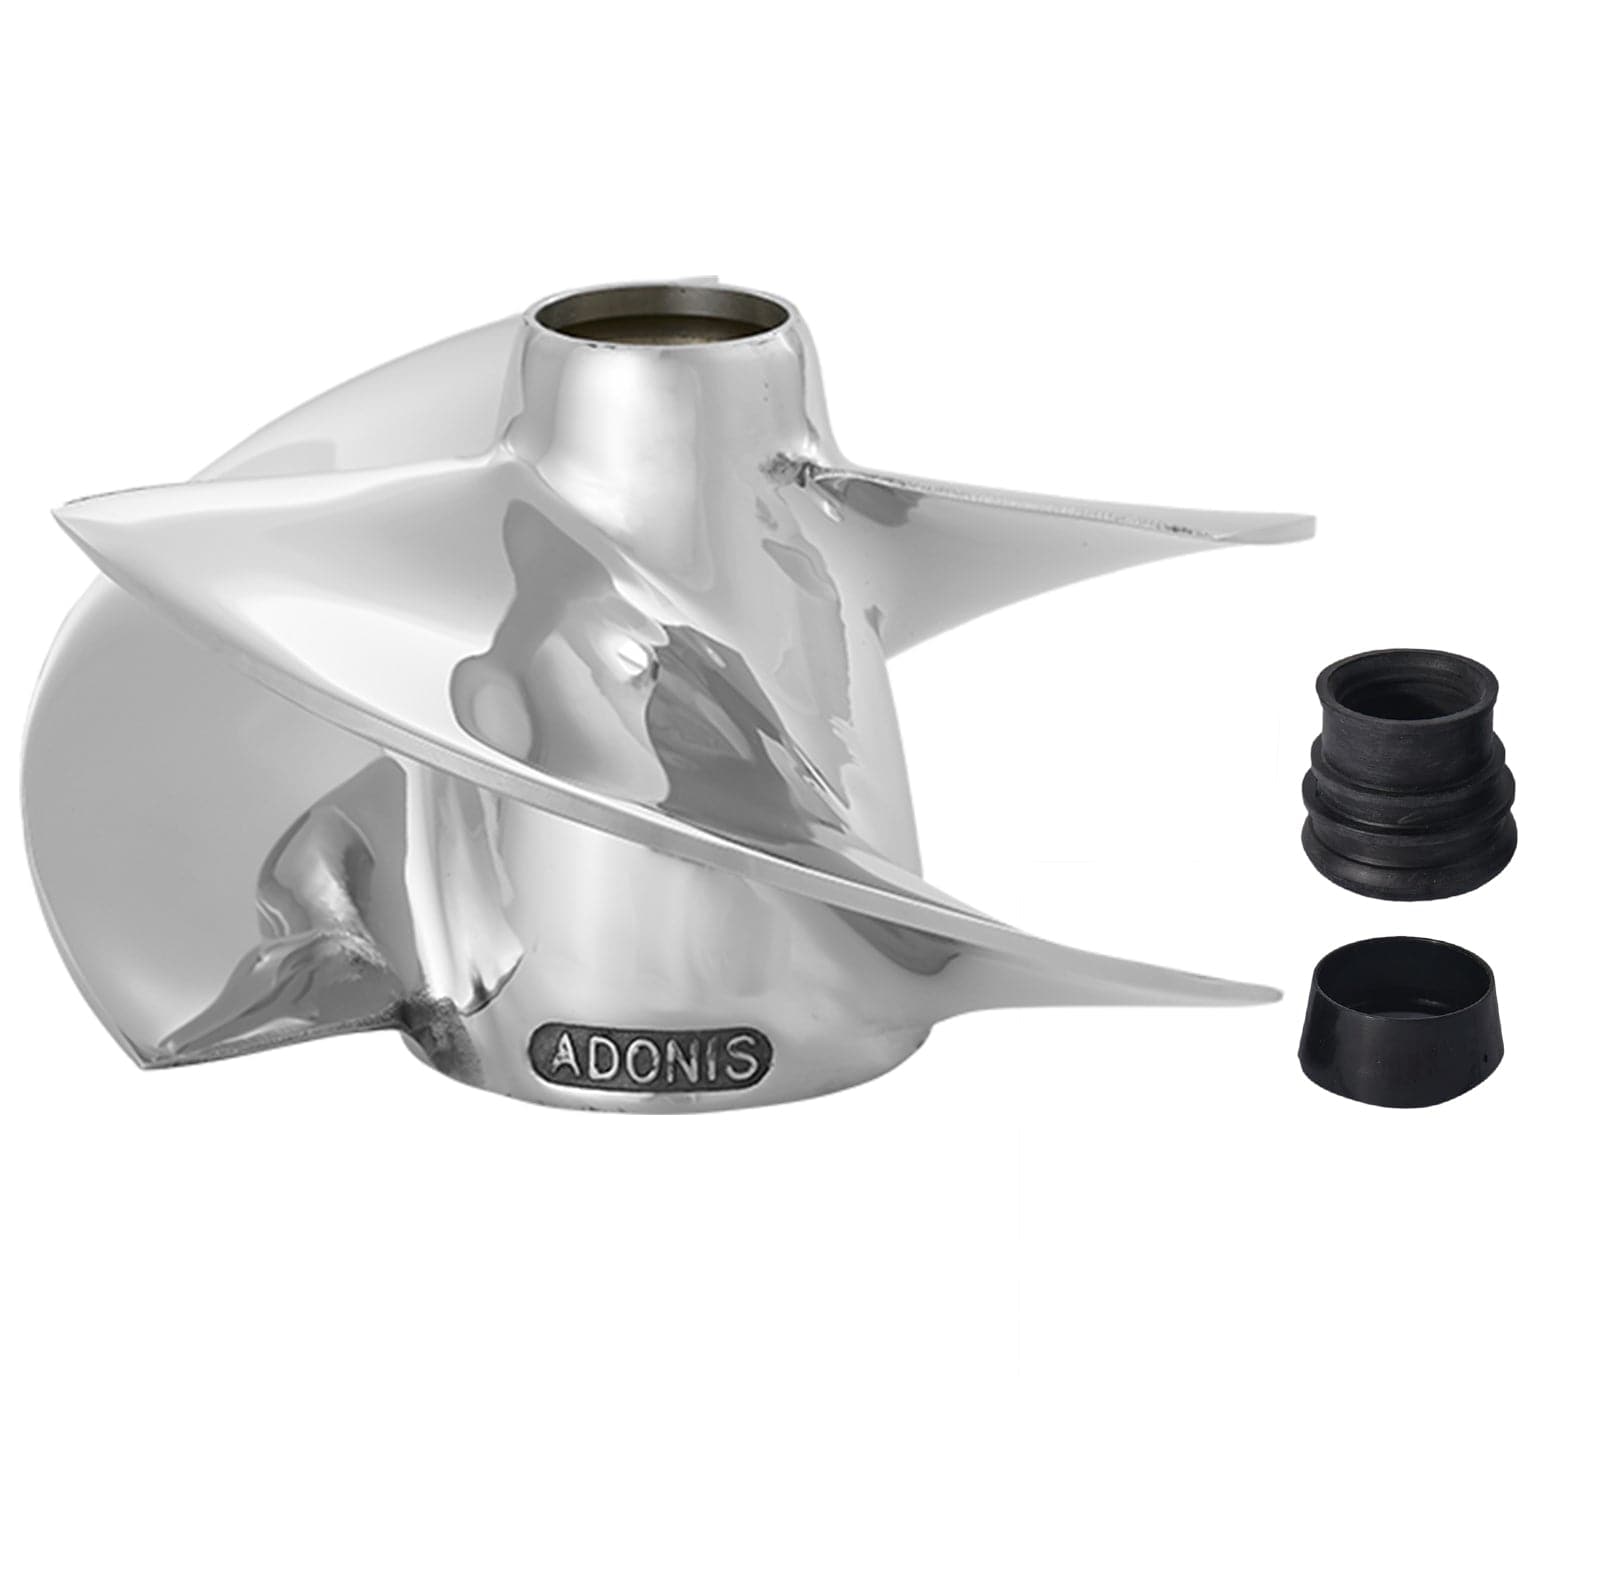 Adonis Impeller for Sea-Doo GTX XP SPX GS GSI GTI GTS Mid 90's early 2000